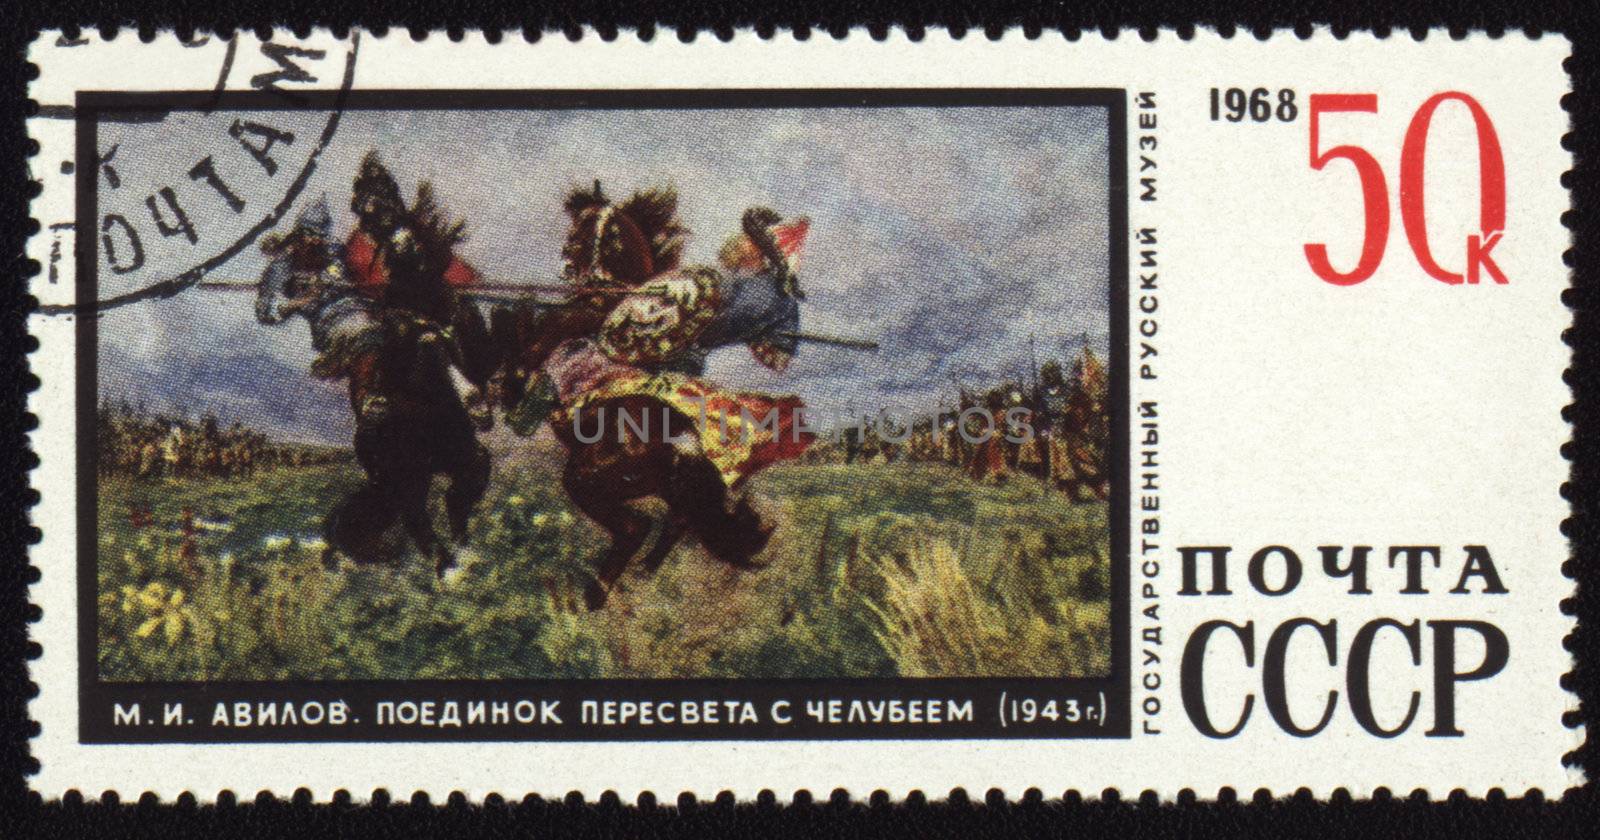 USSR - CIRCA 1968: A stamp printed in the USSR shows a painting "Duel between Peresvet and Chelubey" by Michael Avilov, series "Russian Museum", circa 1968